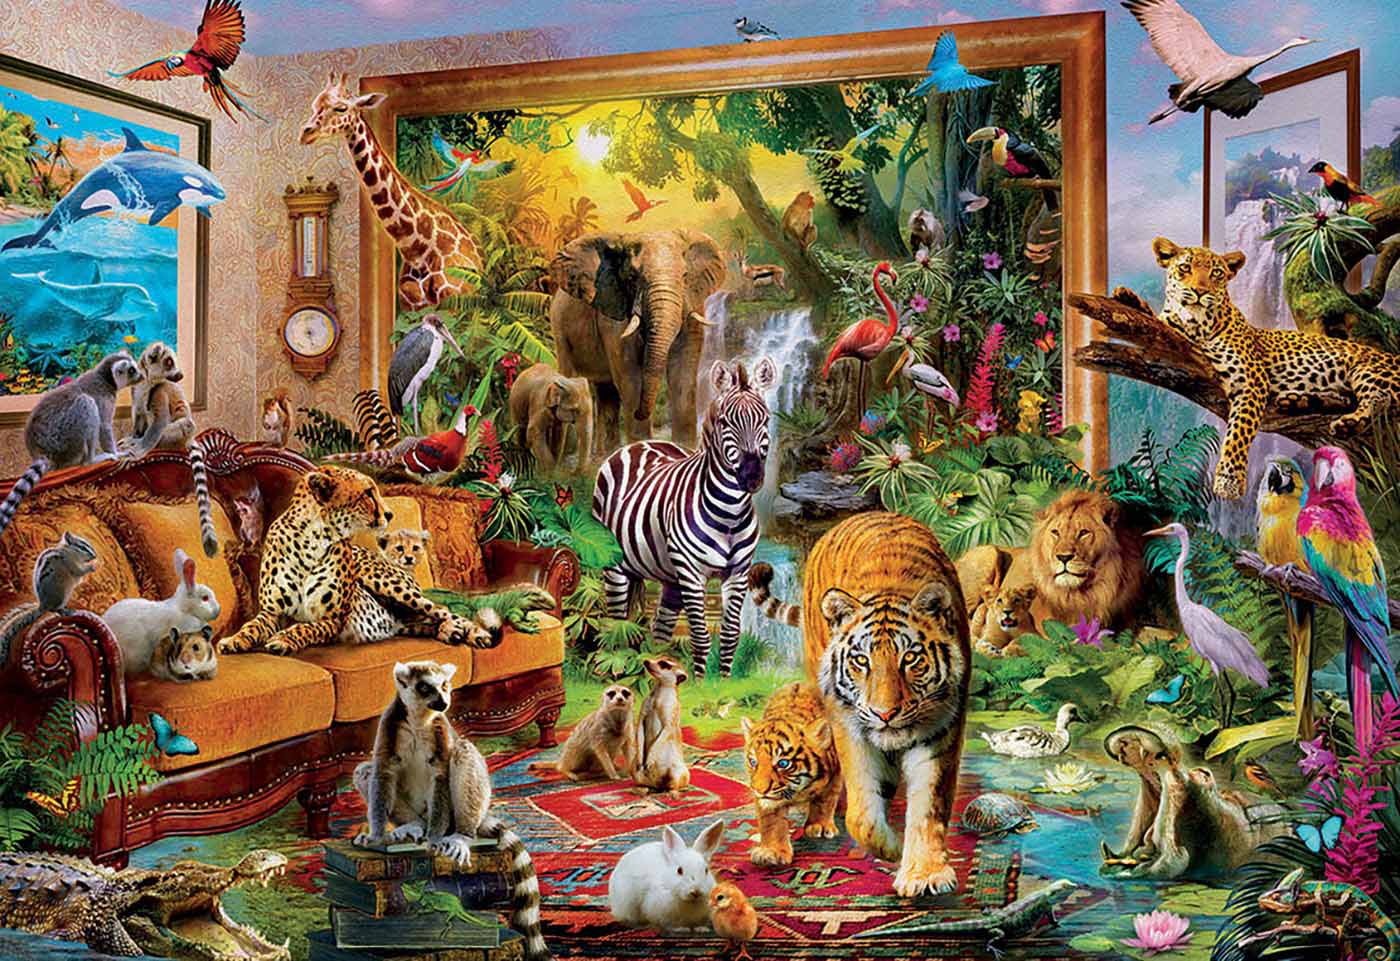 Entering the Bedroom Jungle Animals Jigsaw Puzzle